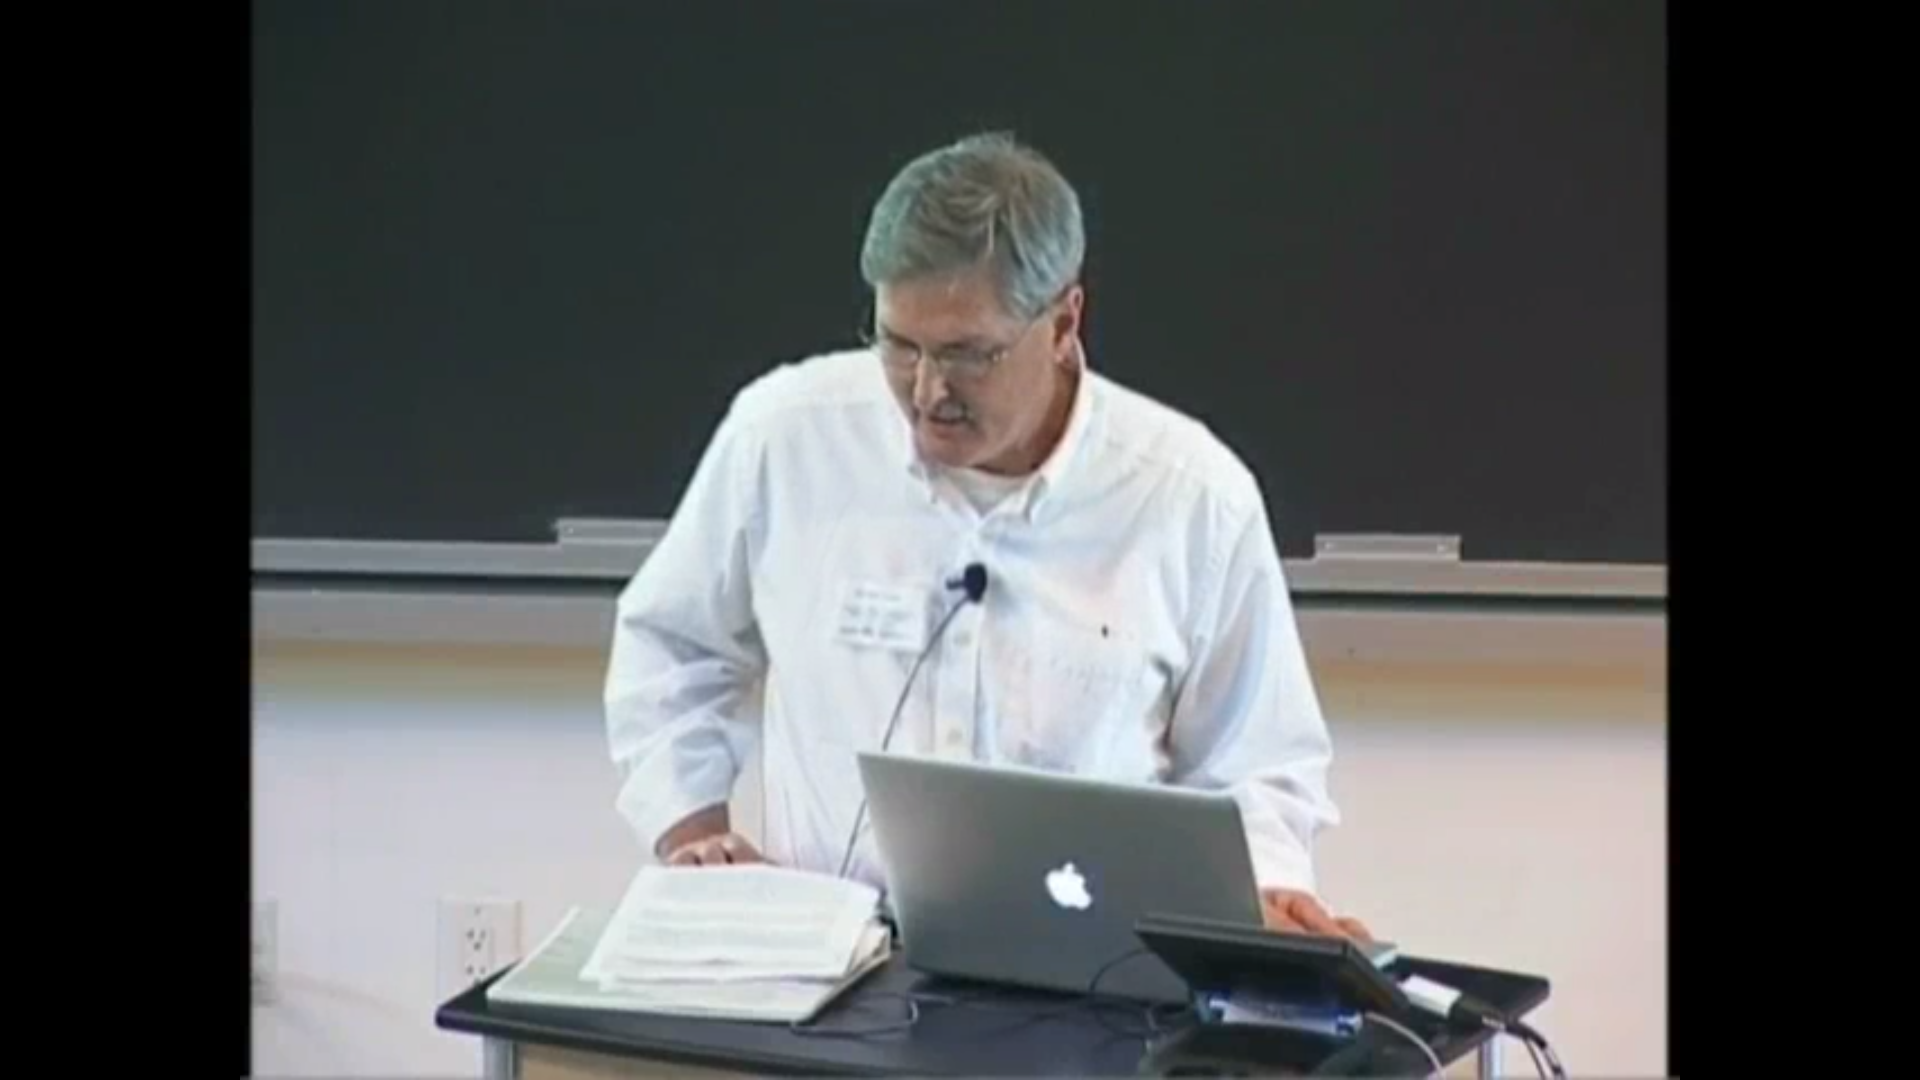 Critical Issues In Mathematics Education 2011: Mathematical Education of Teachers, lecture 6 - Panel on curriculum and teacher education in light of the Common Core Thumbnail